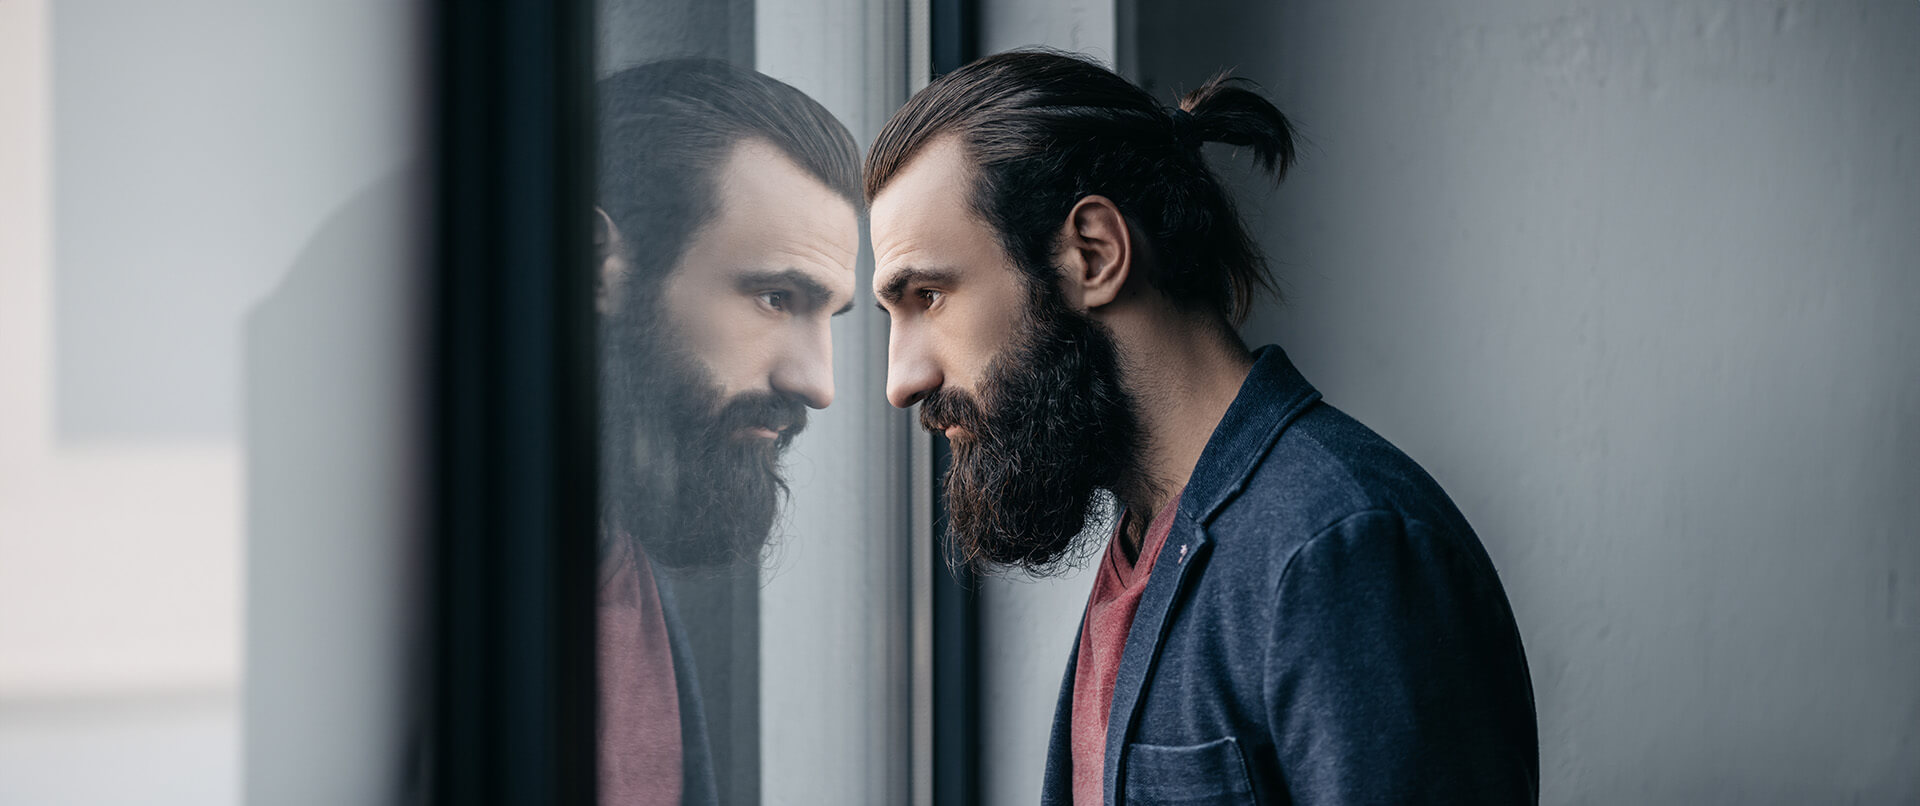 A stressed man gazes at his reflection in a window. This could represent the pain that dual diagnosis treatment in New York, NY can offer support with. Contact a dual diagnosis therapist in New York, NY to learn more about co occurring disorder treatment and other services! 10022